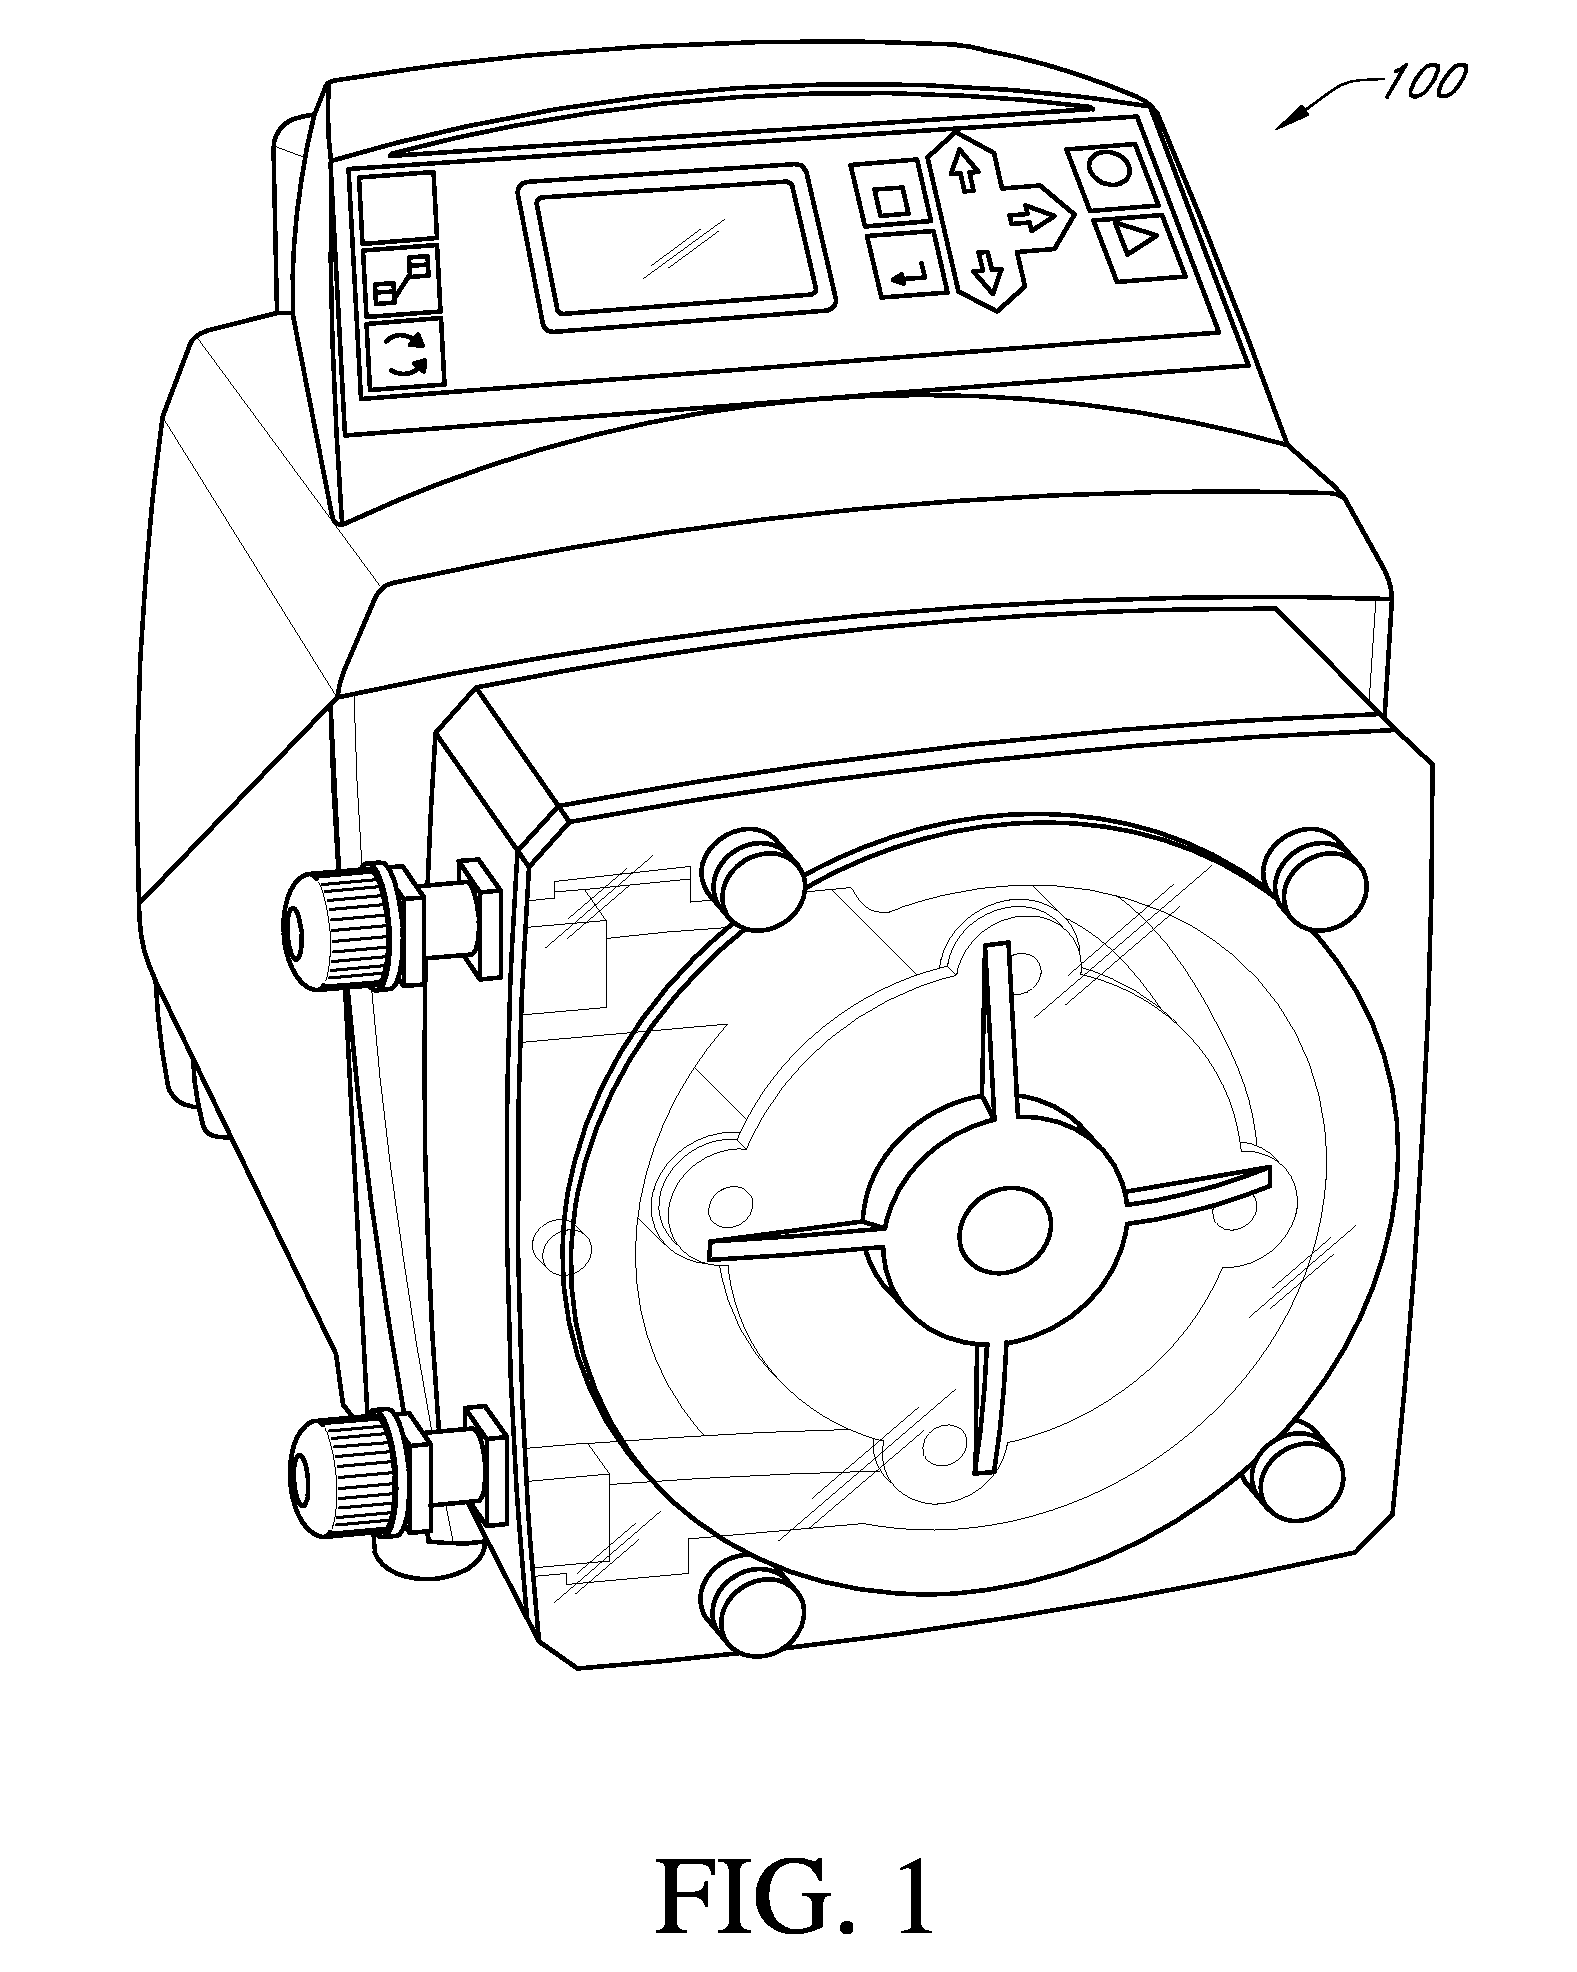 Tubing installation tool for a peristaltic pump and methods of use